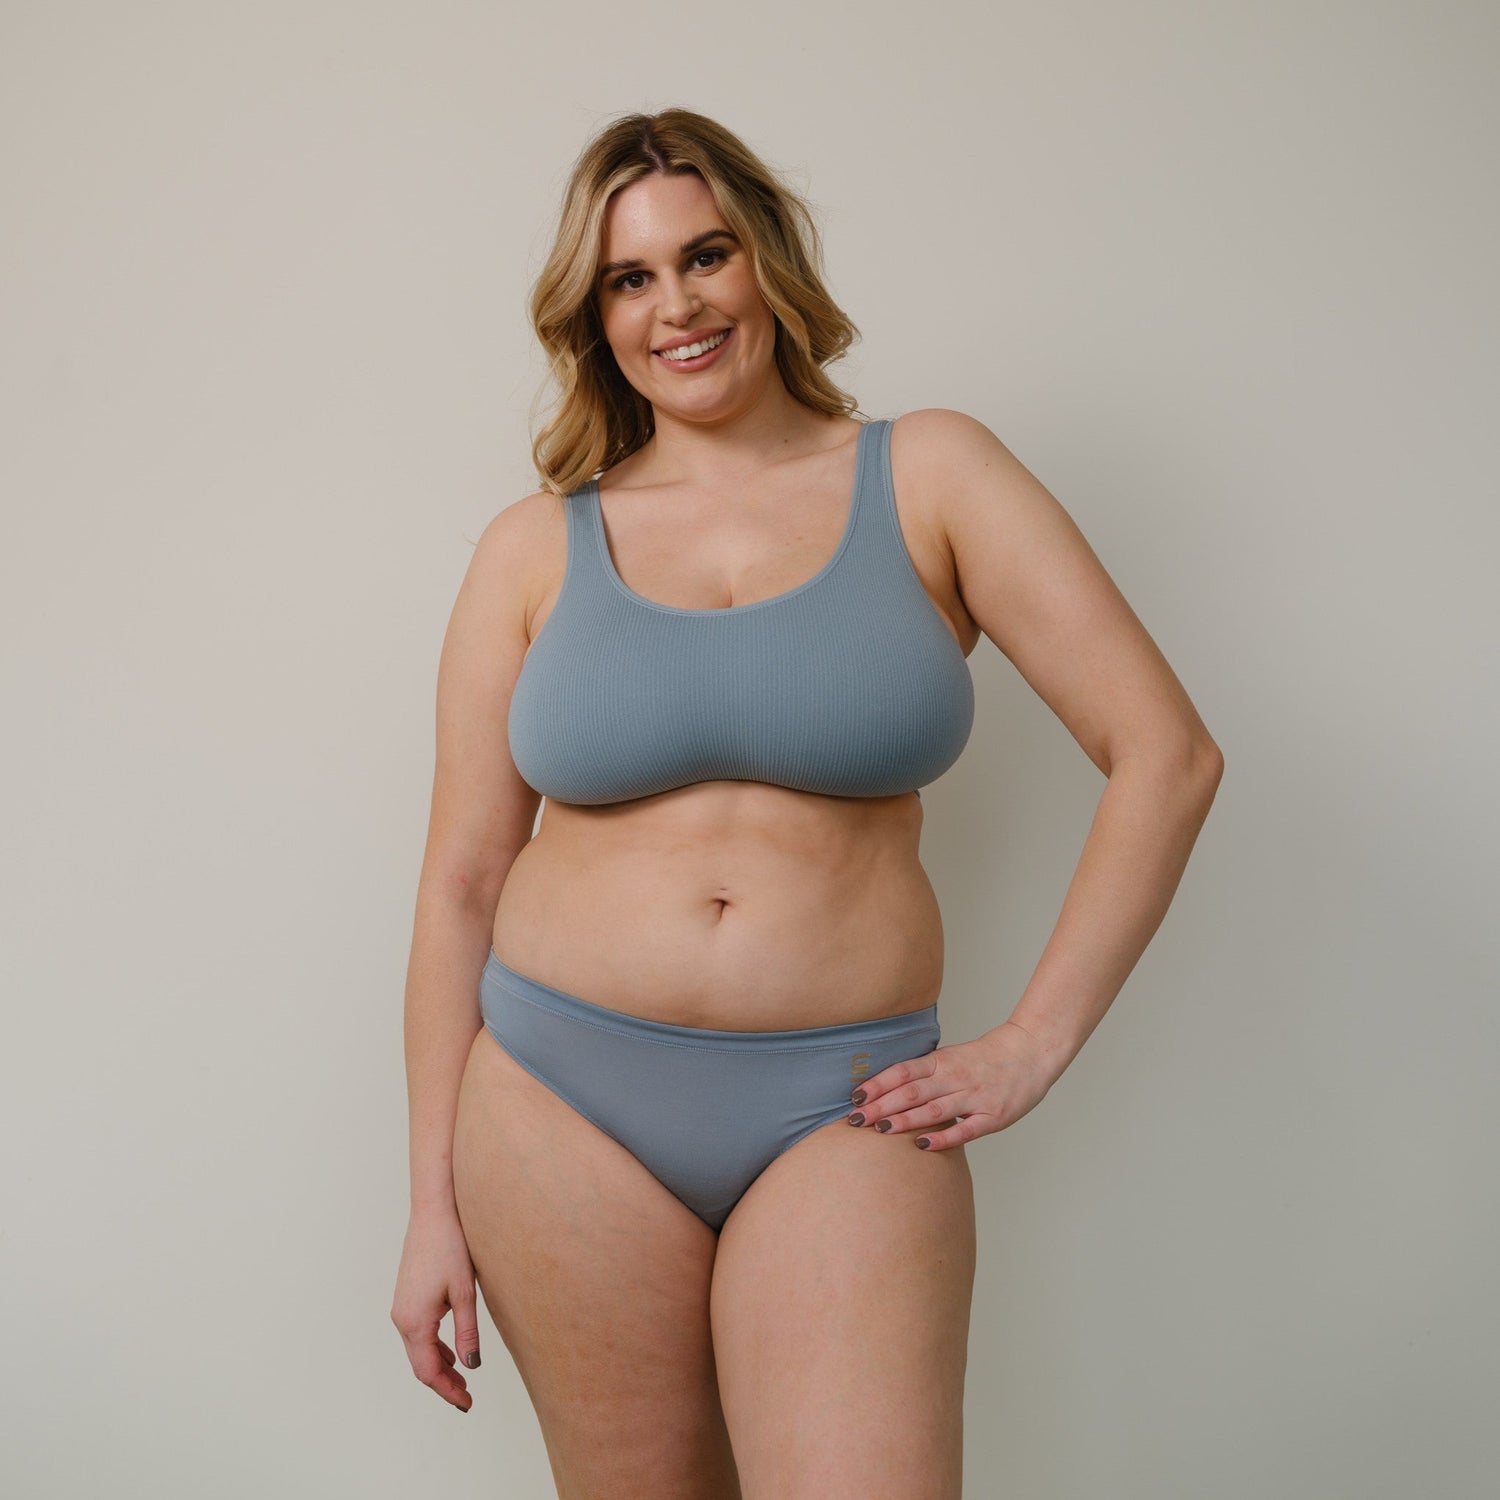 Sustainable, ethically produced mineral blue bra crop by Underwear for Humanity: stronger support for larger bust, D - GG cup sizes. Recycled materials, knitted bra and band, seamfree, made from recycled nylon. Model wears the D+ Crop